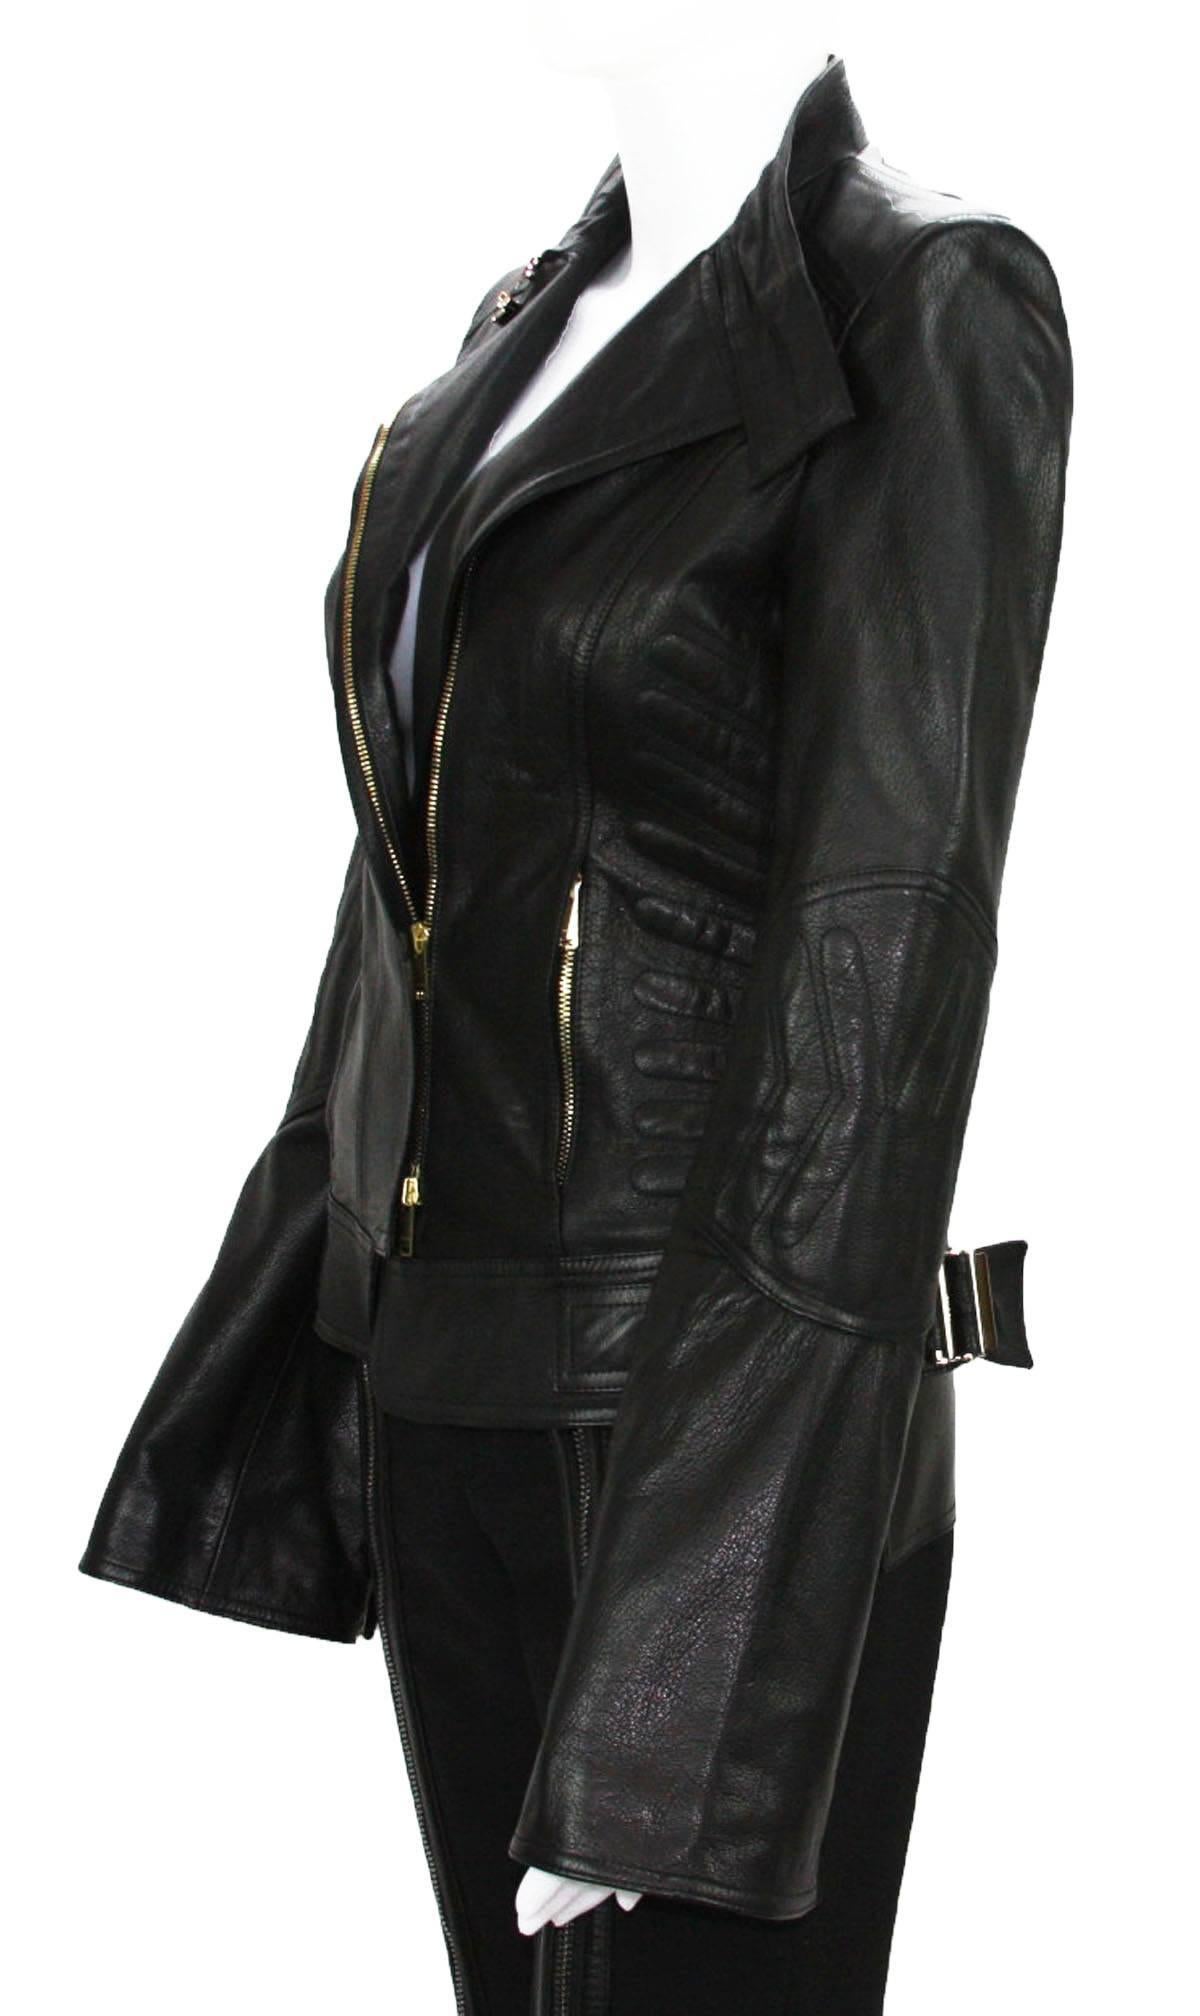 New TOM FORD for GUCCI 2004 Collection Leather Chevron Black Jacket It 40 - US 4 1